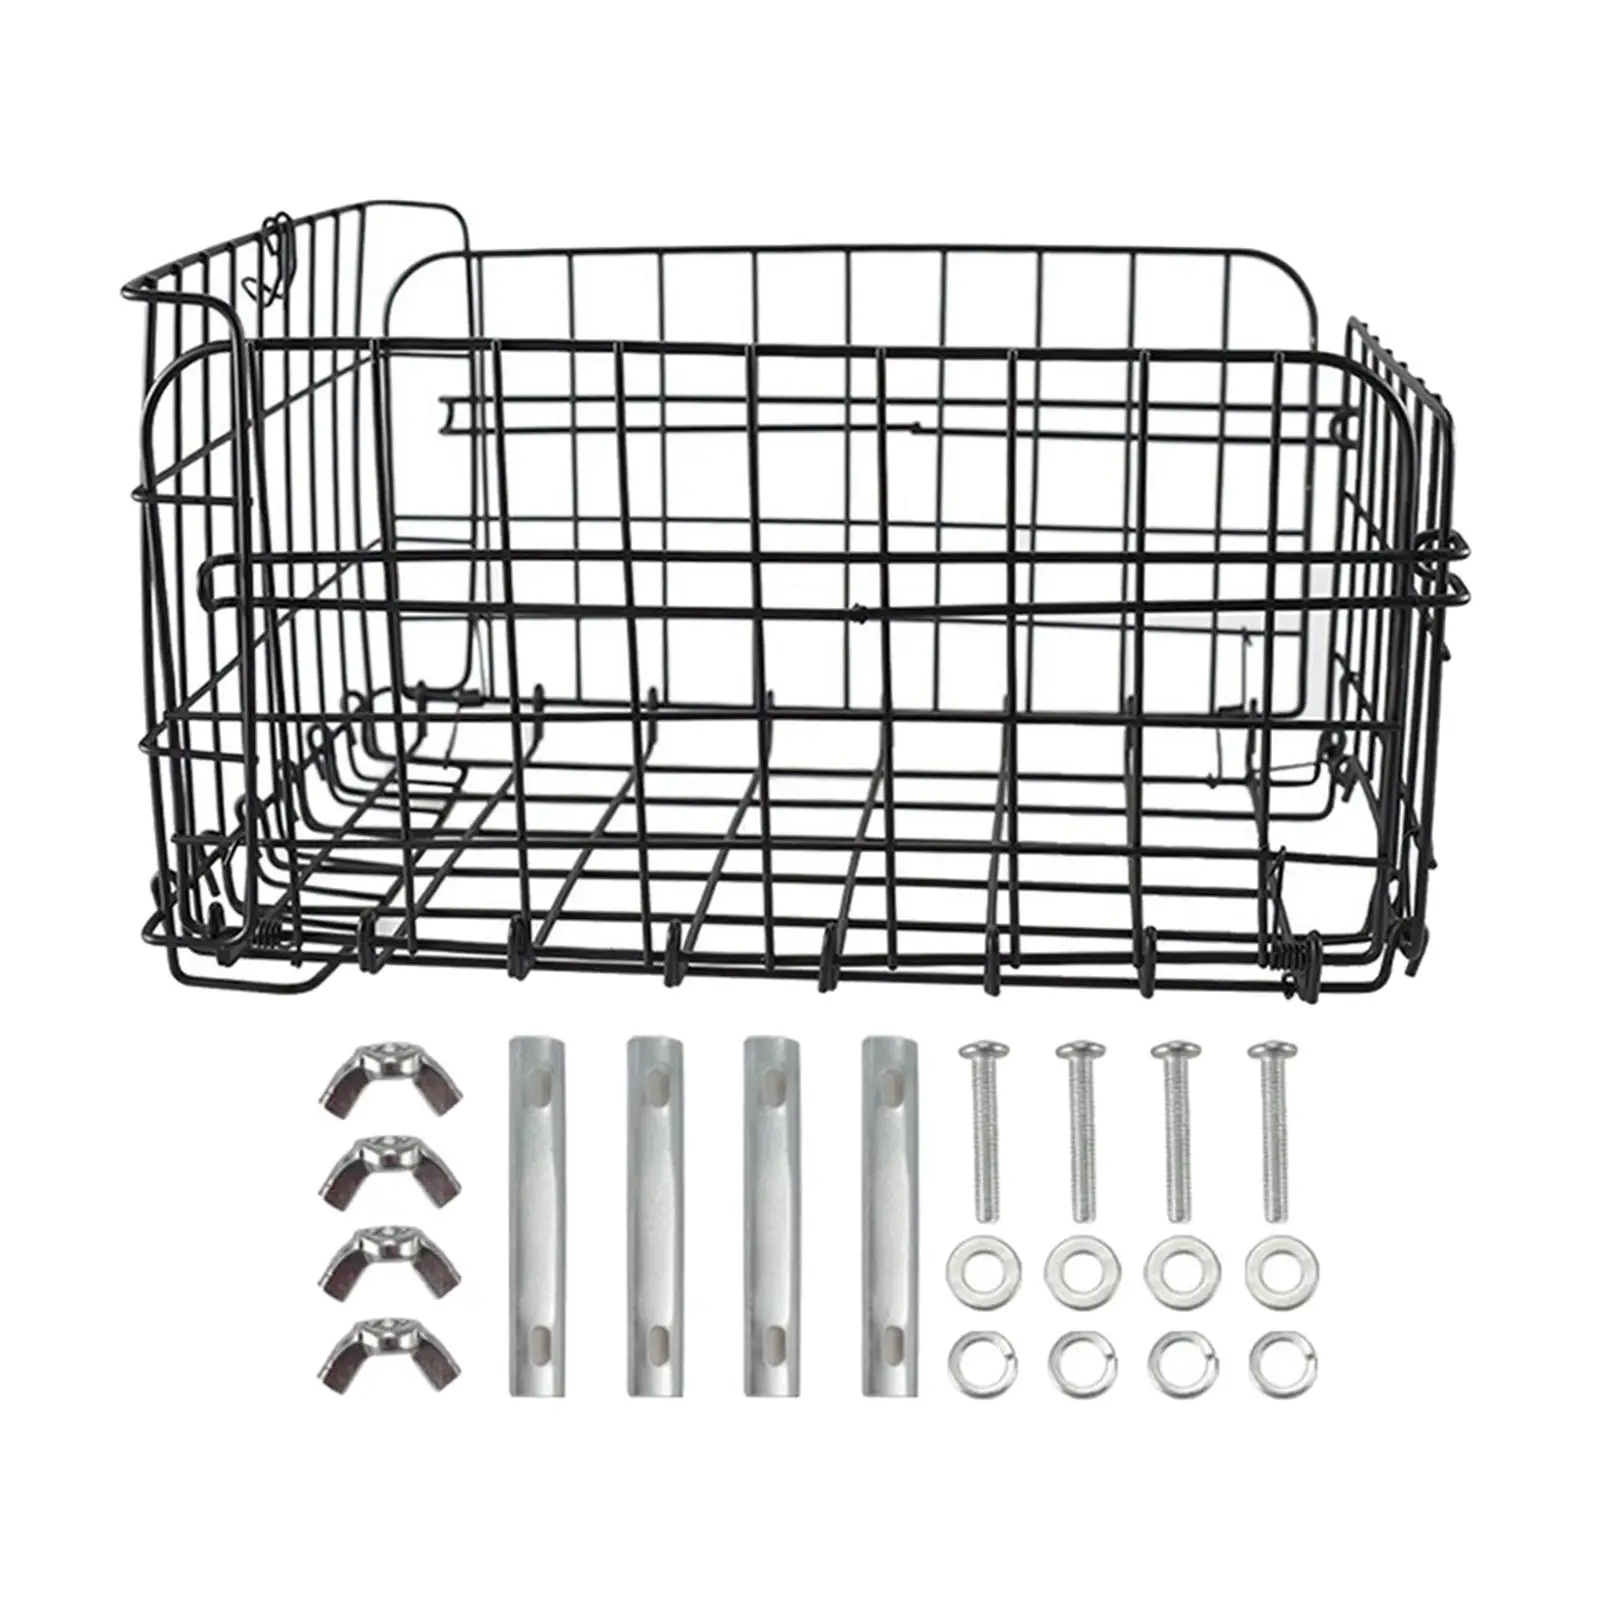 Thicken Bike Front Basket Foldable Hanging Cycling Baskets for Both Front or Rear with Mesh Bottom Easily Install Universal